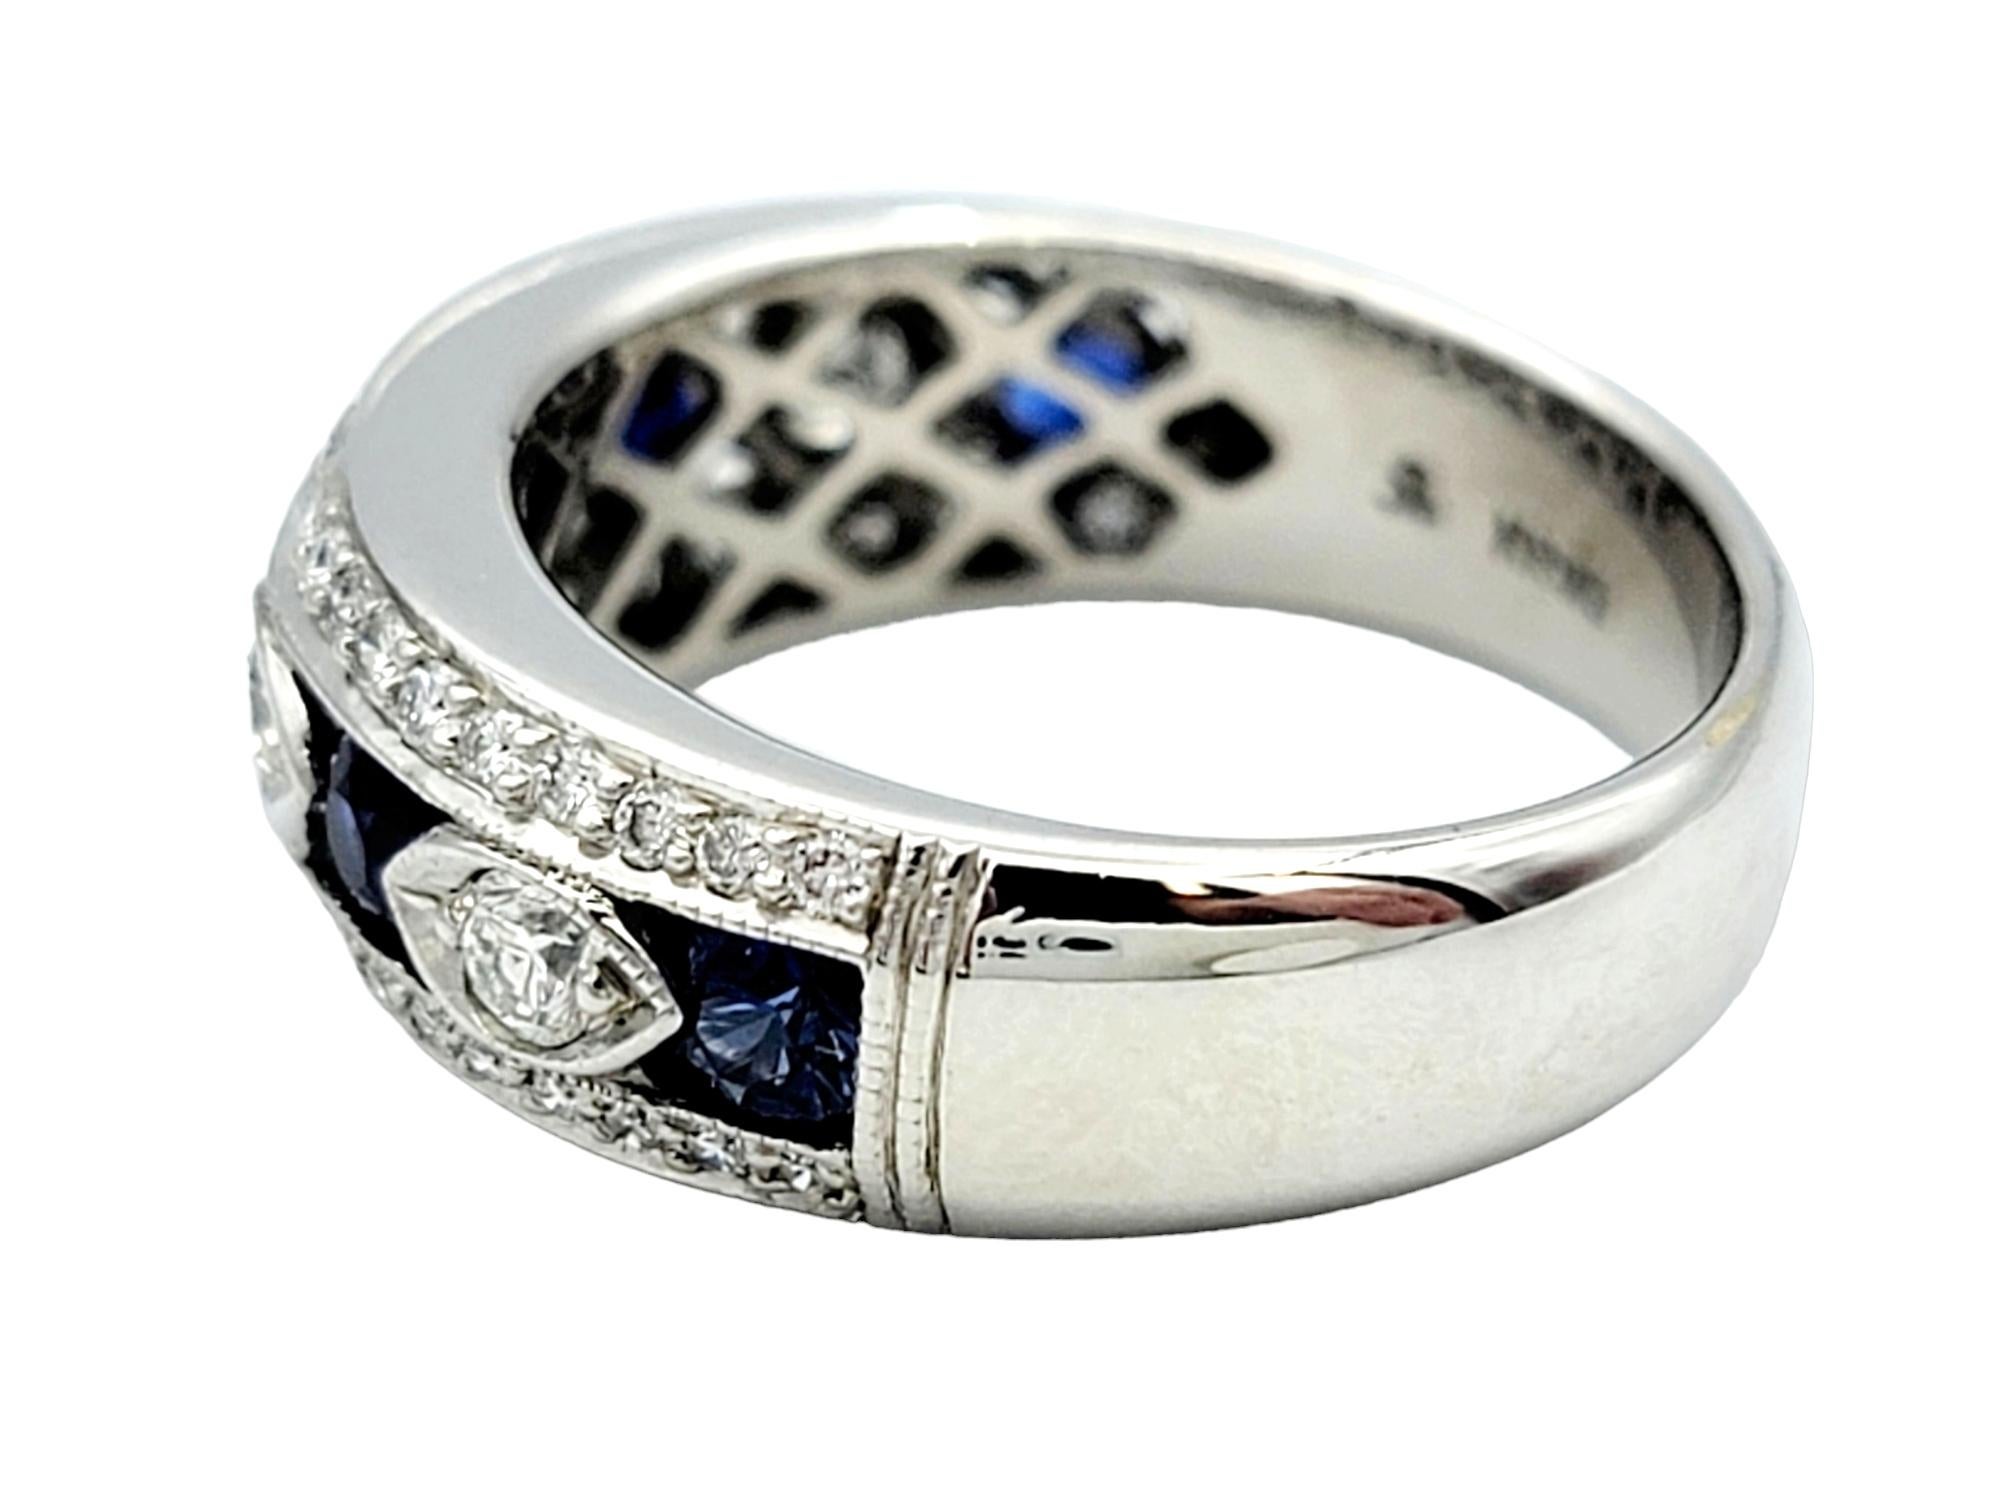 Alternating Diamond and Sapphire Band Ring with Milgrain in 18 Karat White Gold In Good Condition For Sale In Scottsdale, AZ